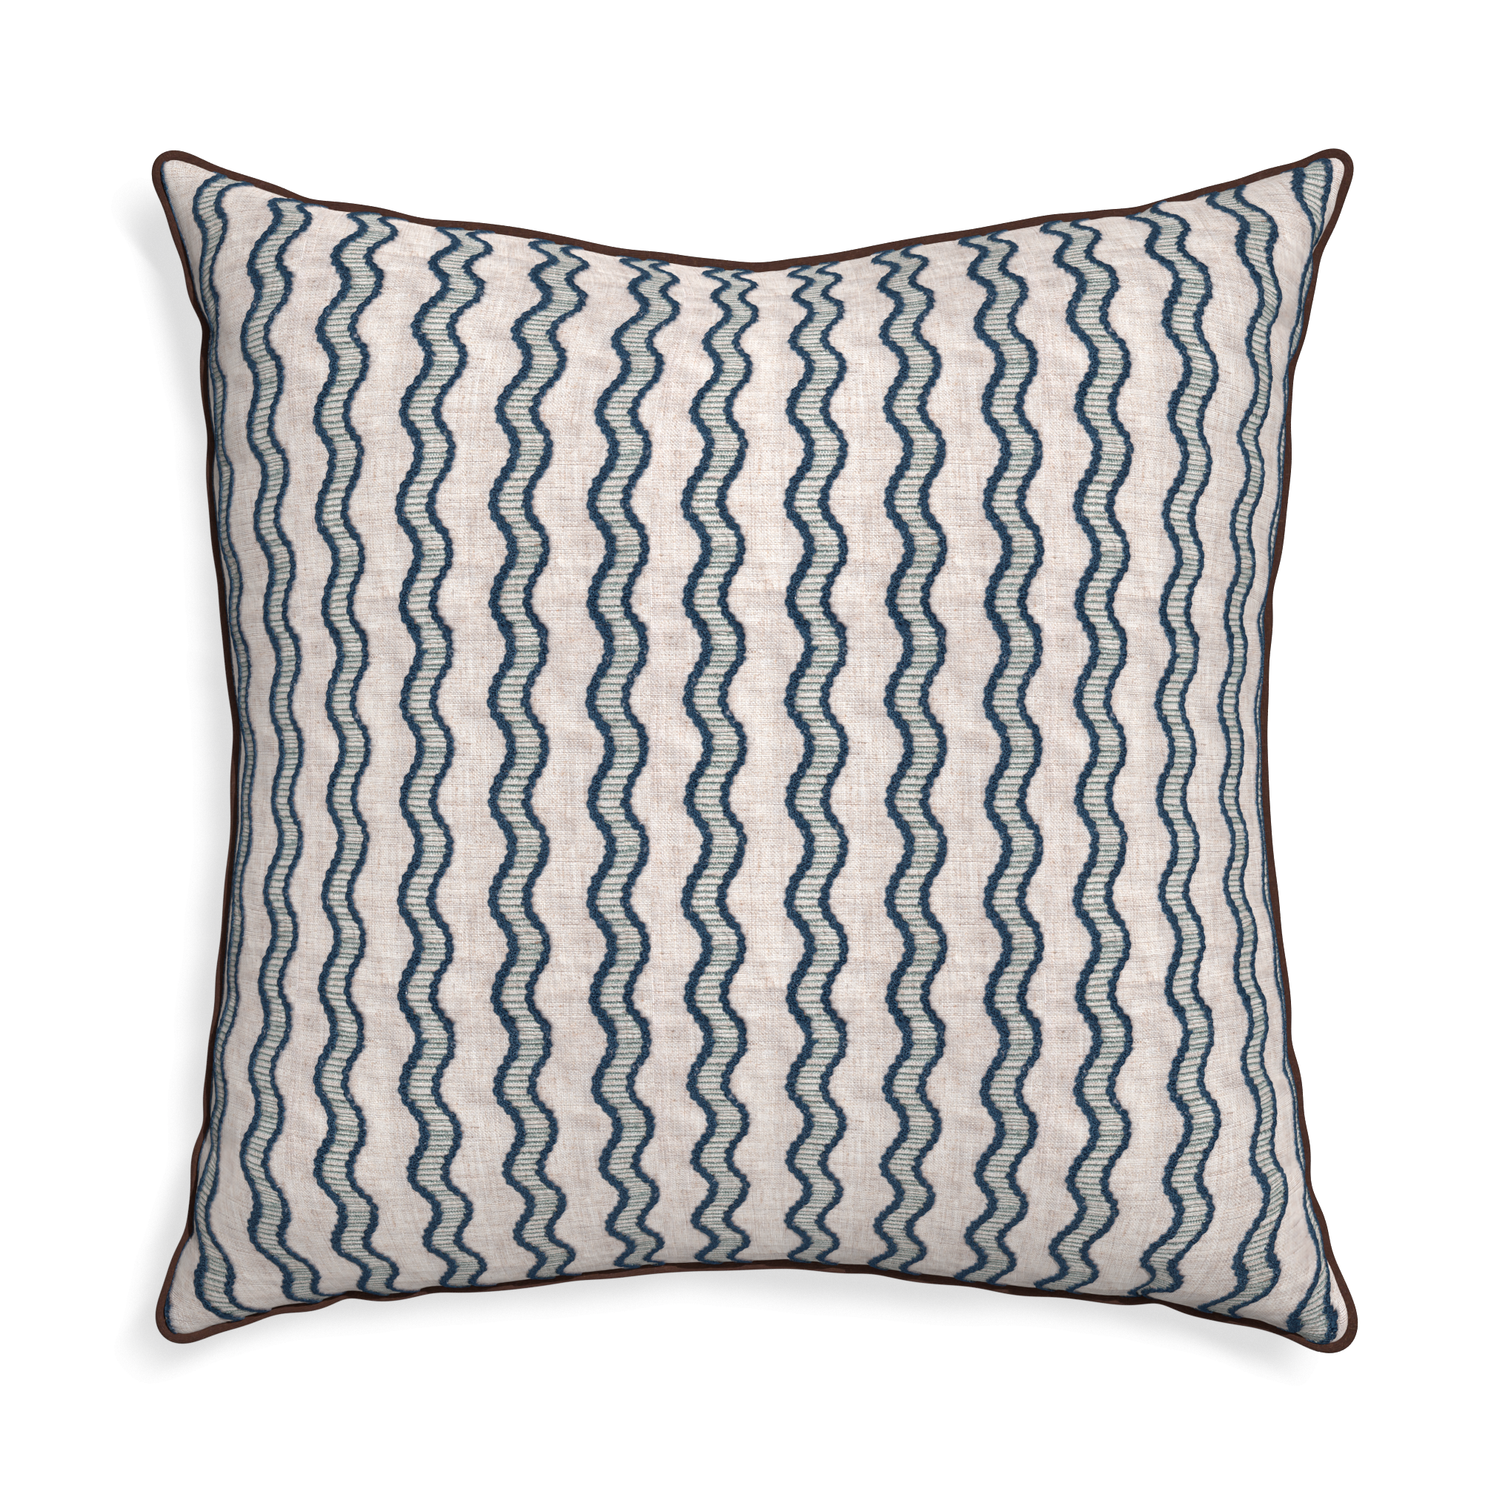 Euro-sham beatrice custom embroidered wavepillow with w piping on white background